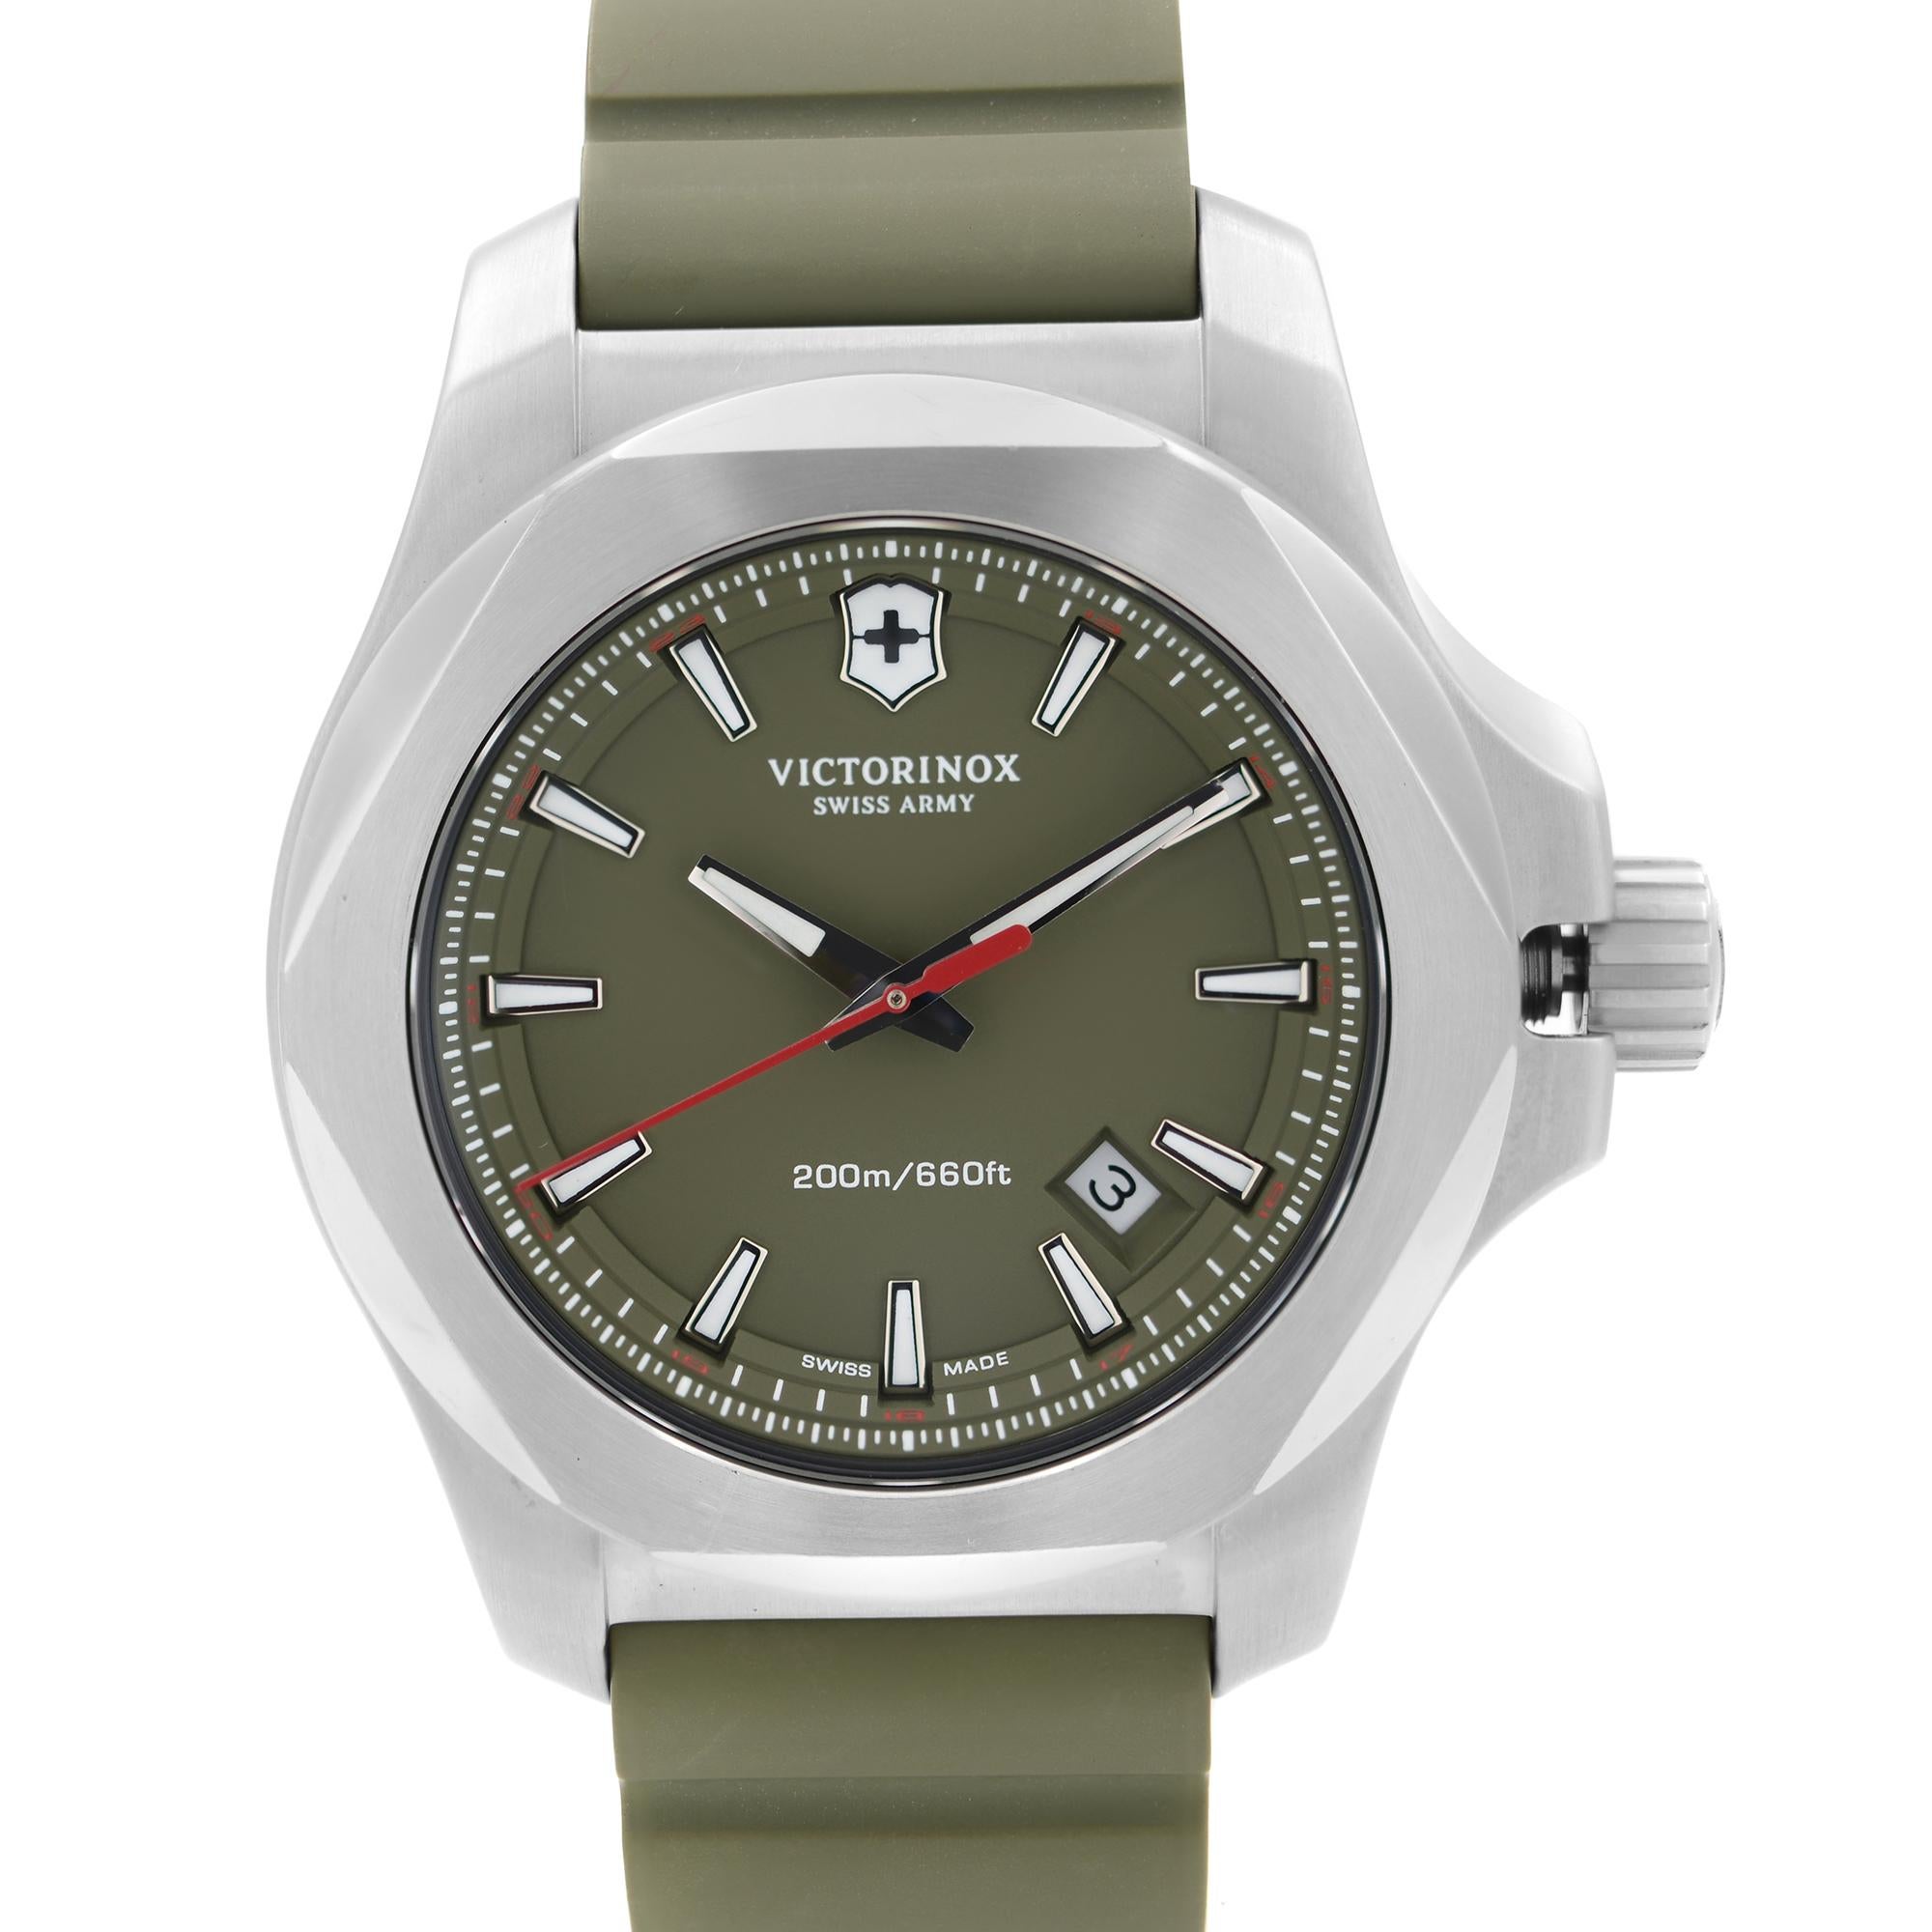 Pre-owned like new Victorinox Swiss Army I.N.O.X. Stainless Steel 43mm Green Dial Men's Quartz Watch 241683.1. This Beautiful Timepiece Features: Brushed Stainless Steel Case and Two-Piece Rubber Strap. Fixed Stainless Steel Bezel. Green Dial with